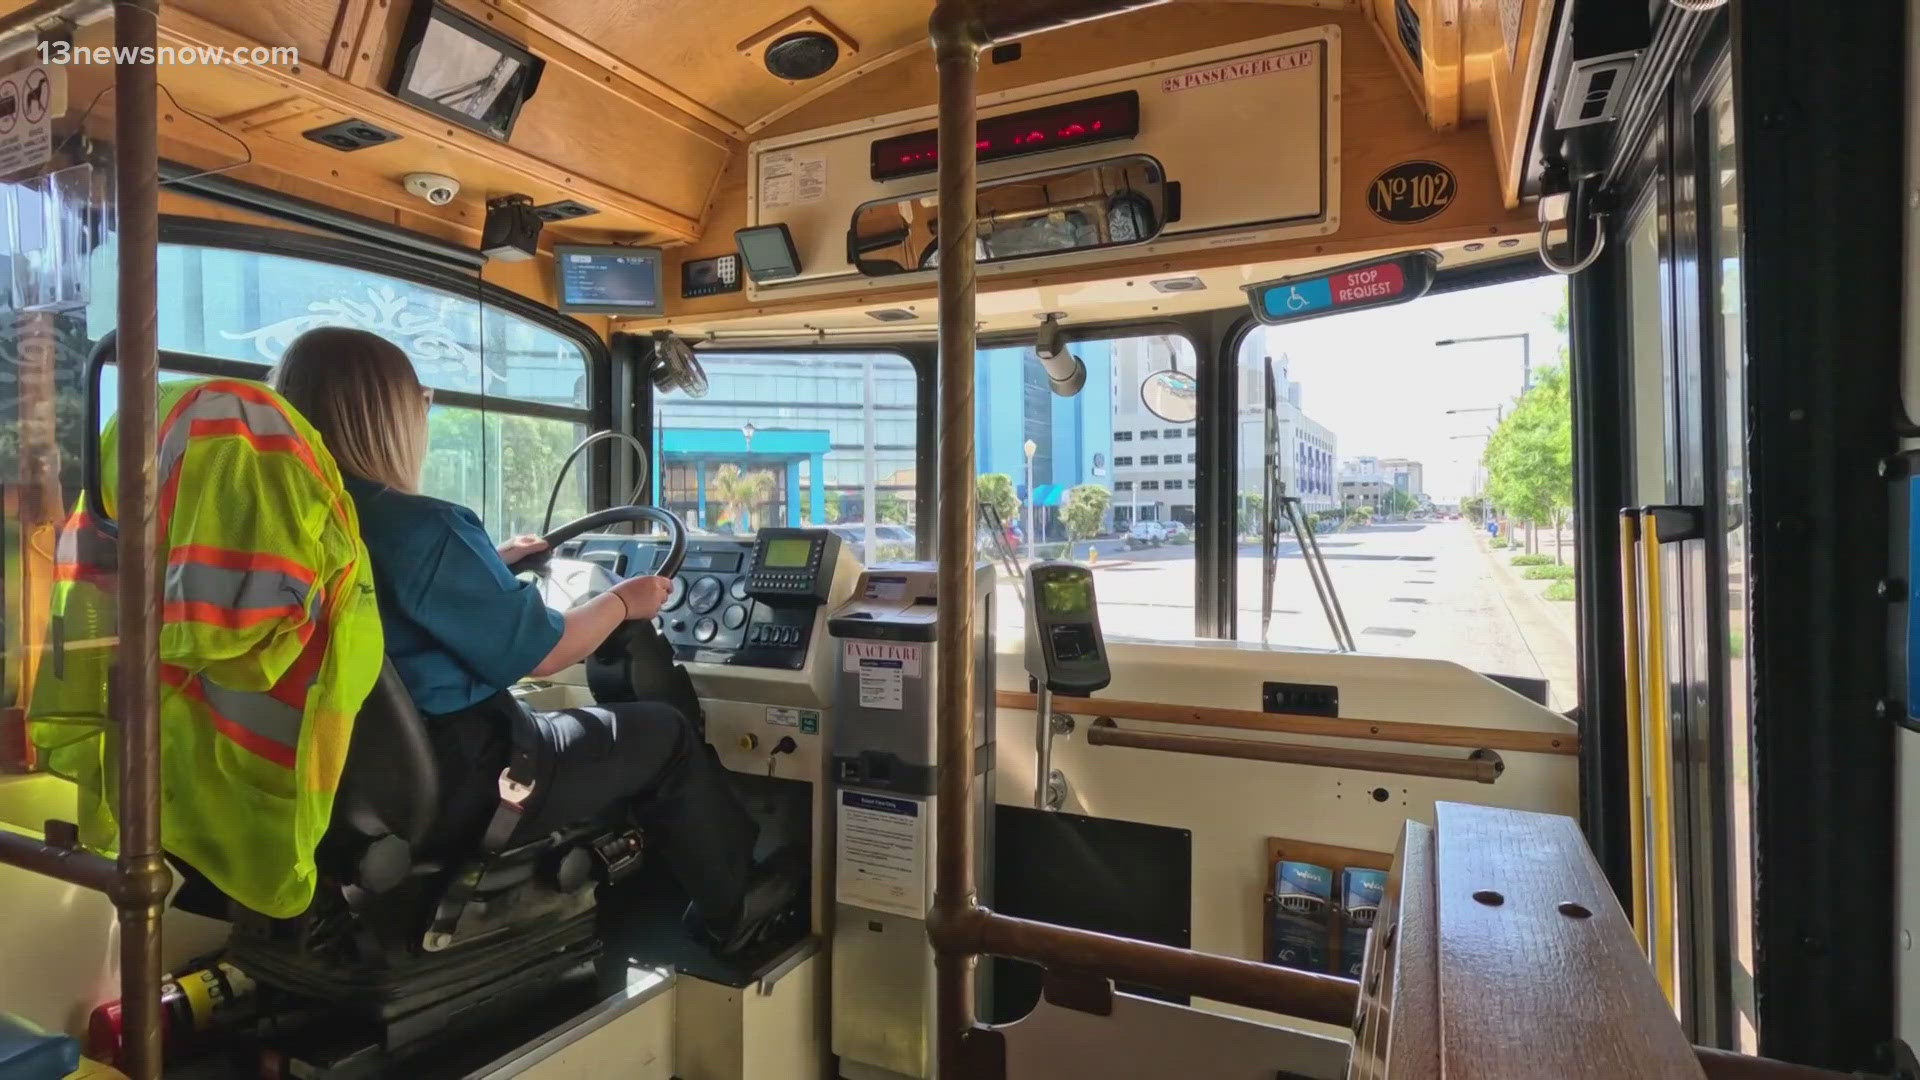 The trolley and shuttle operated by Hampton Roads Transit, makes it easier for locals and tourists alike to navigate attractions and the beach along Atlantic Avenue.